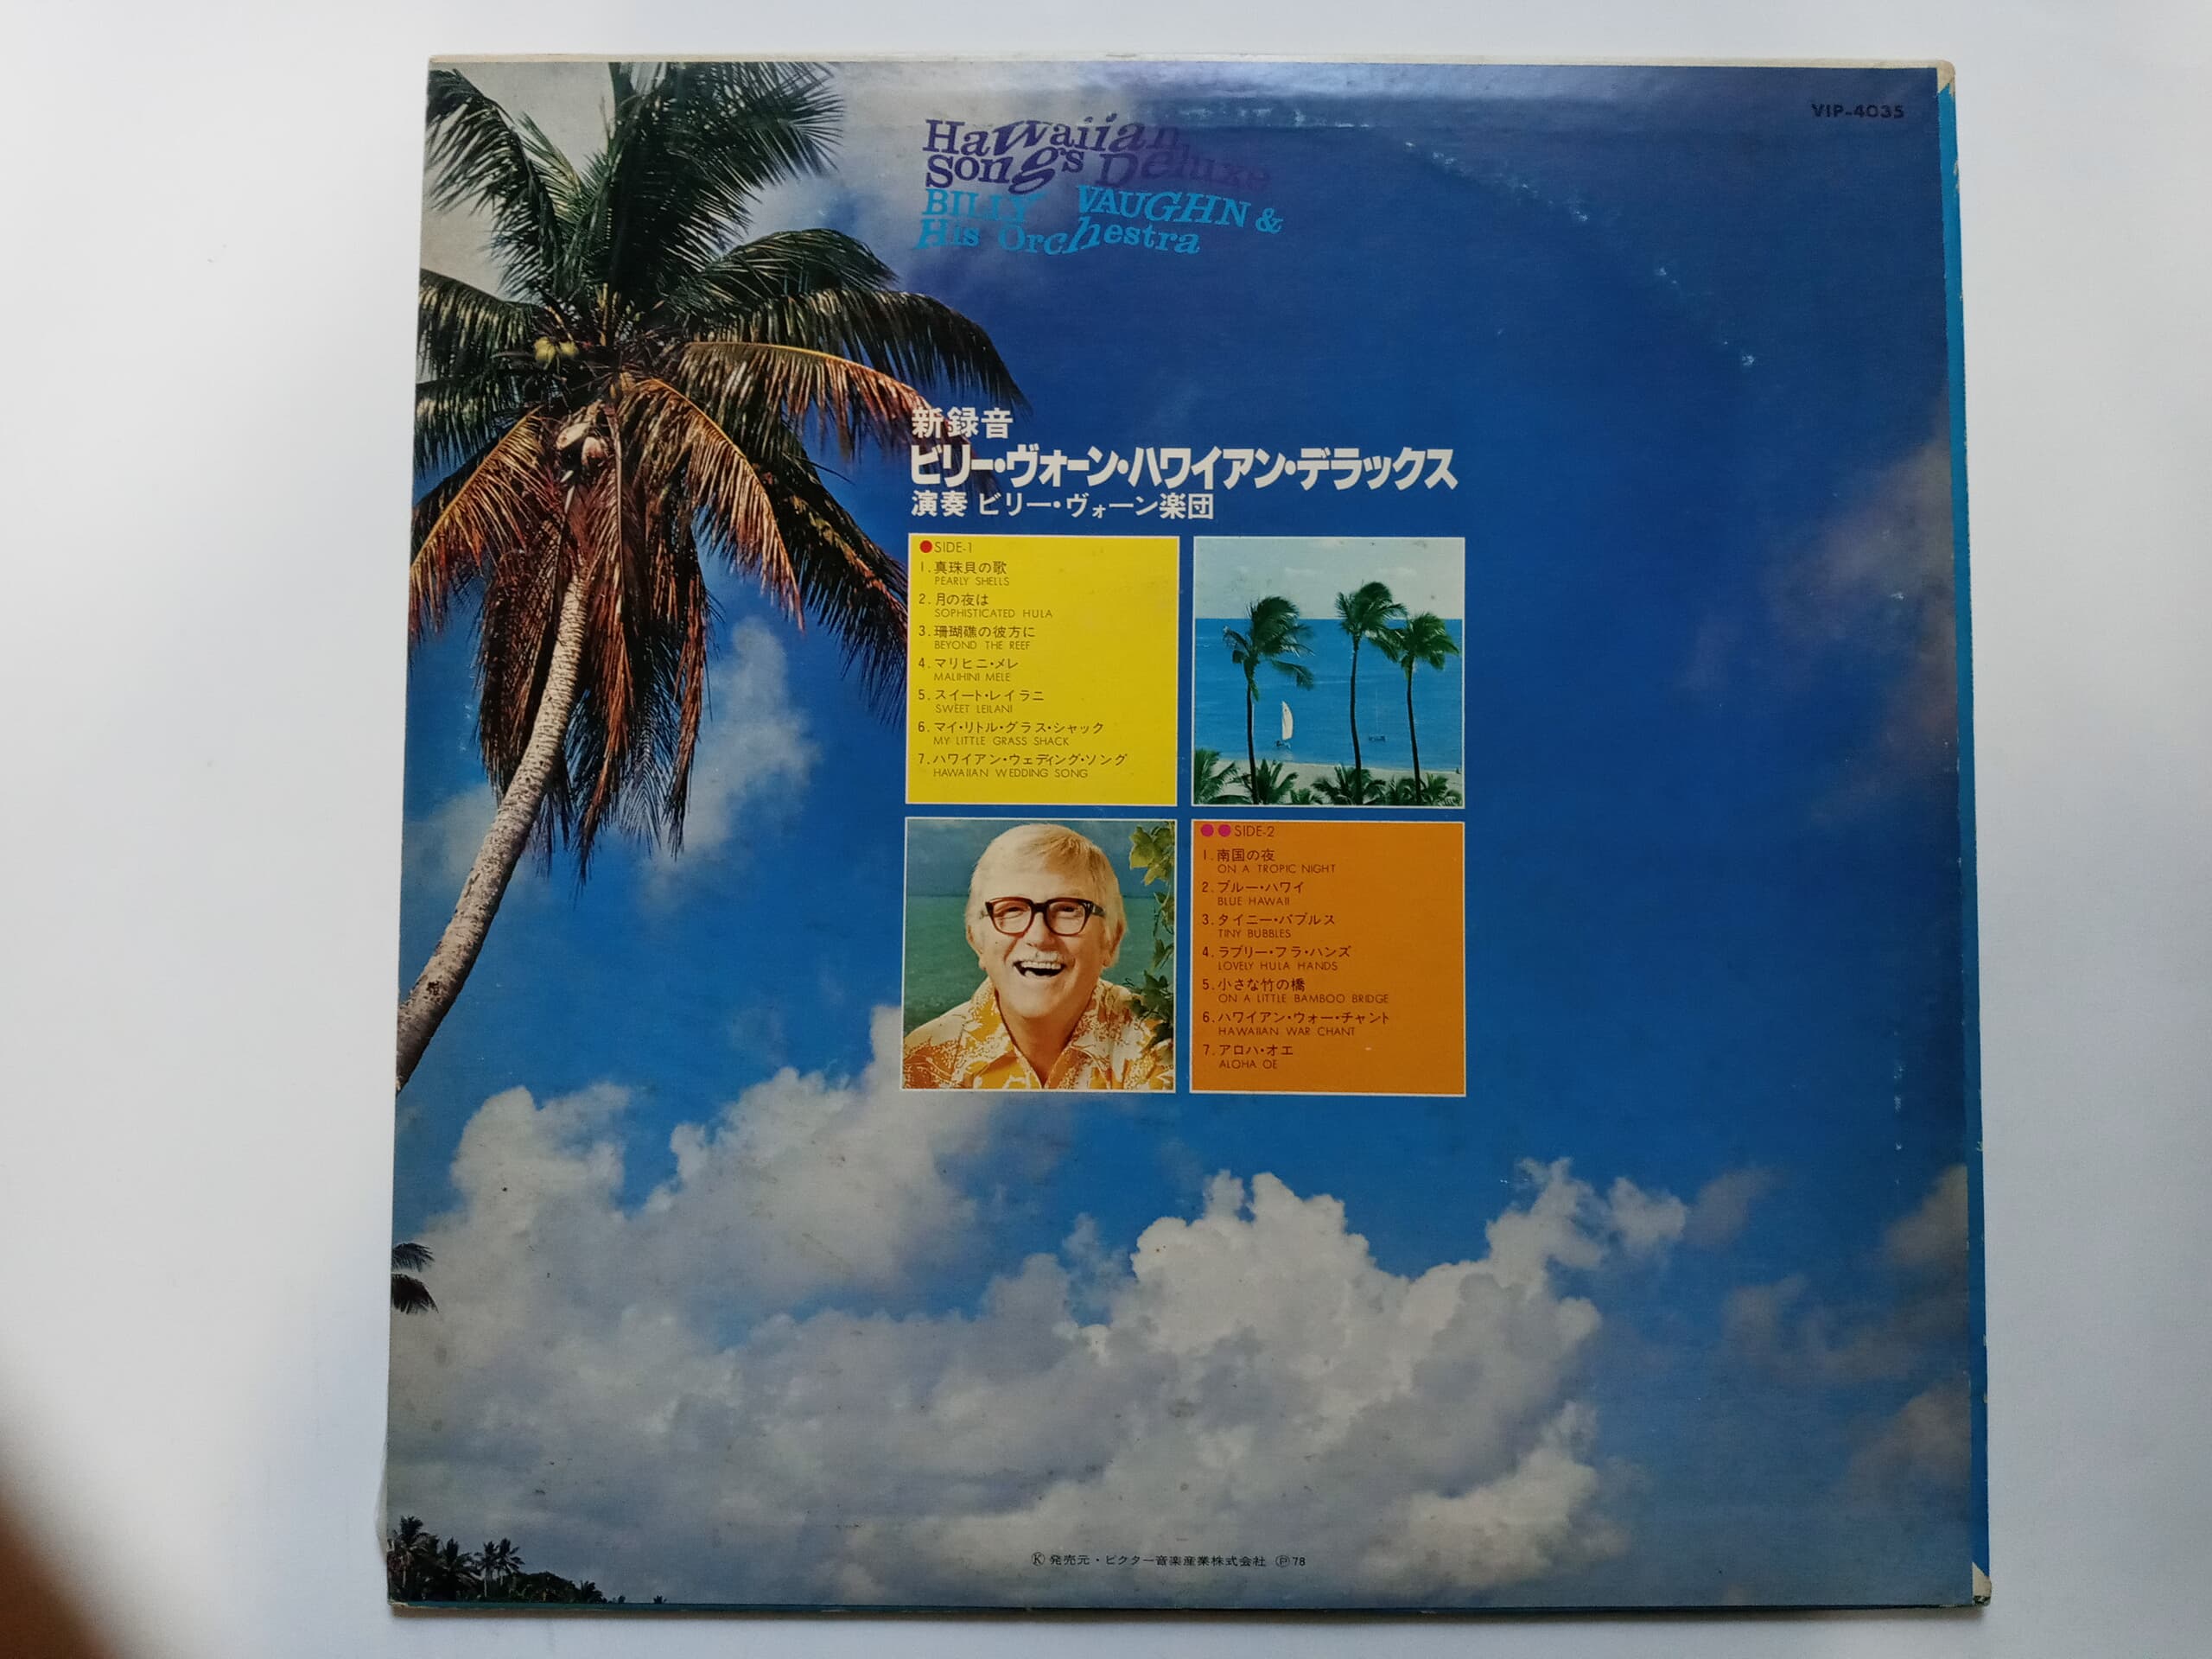 LP(수입) 빌리 본 악단 Billy Vaughn And His Orchestra : Hawaiian Songs Deluxe